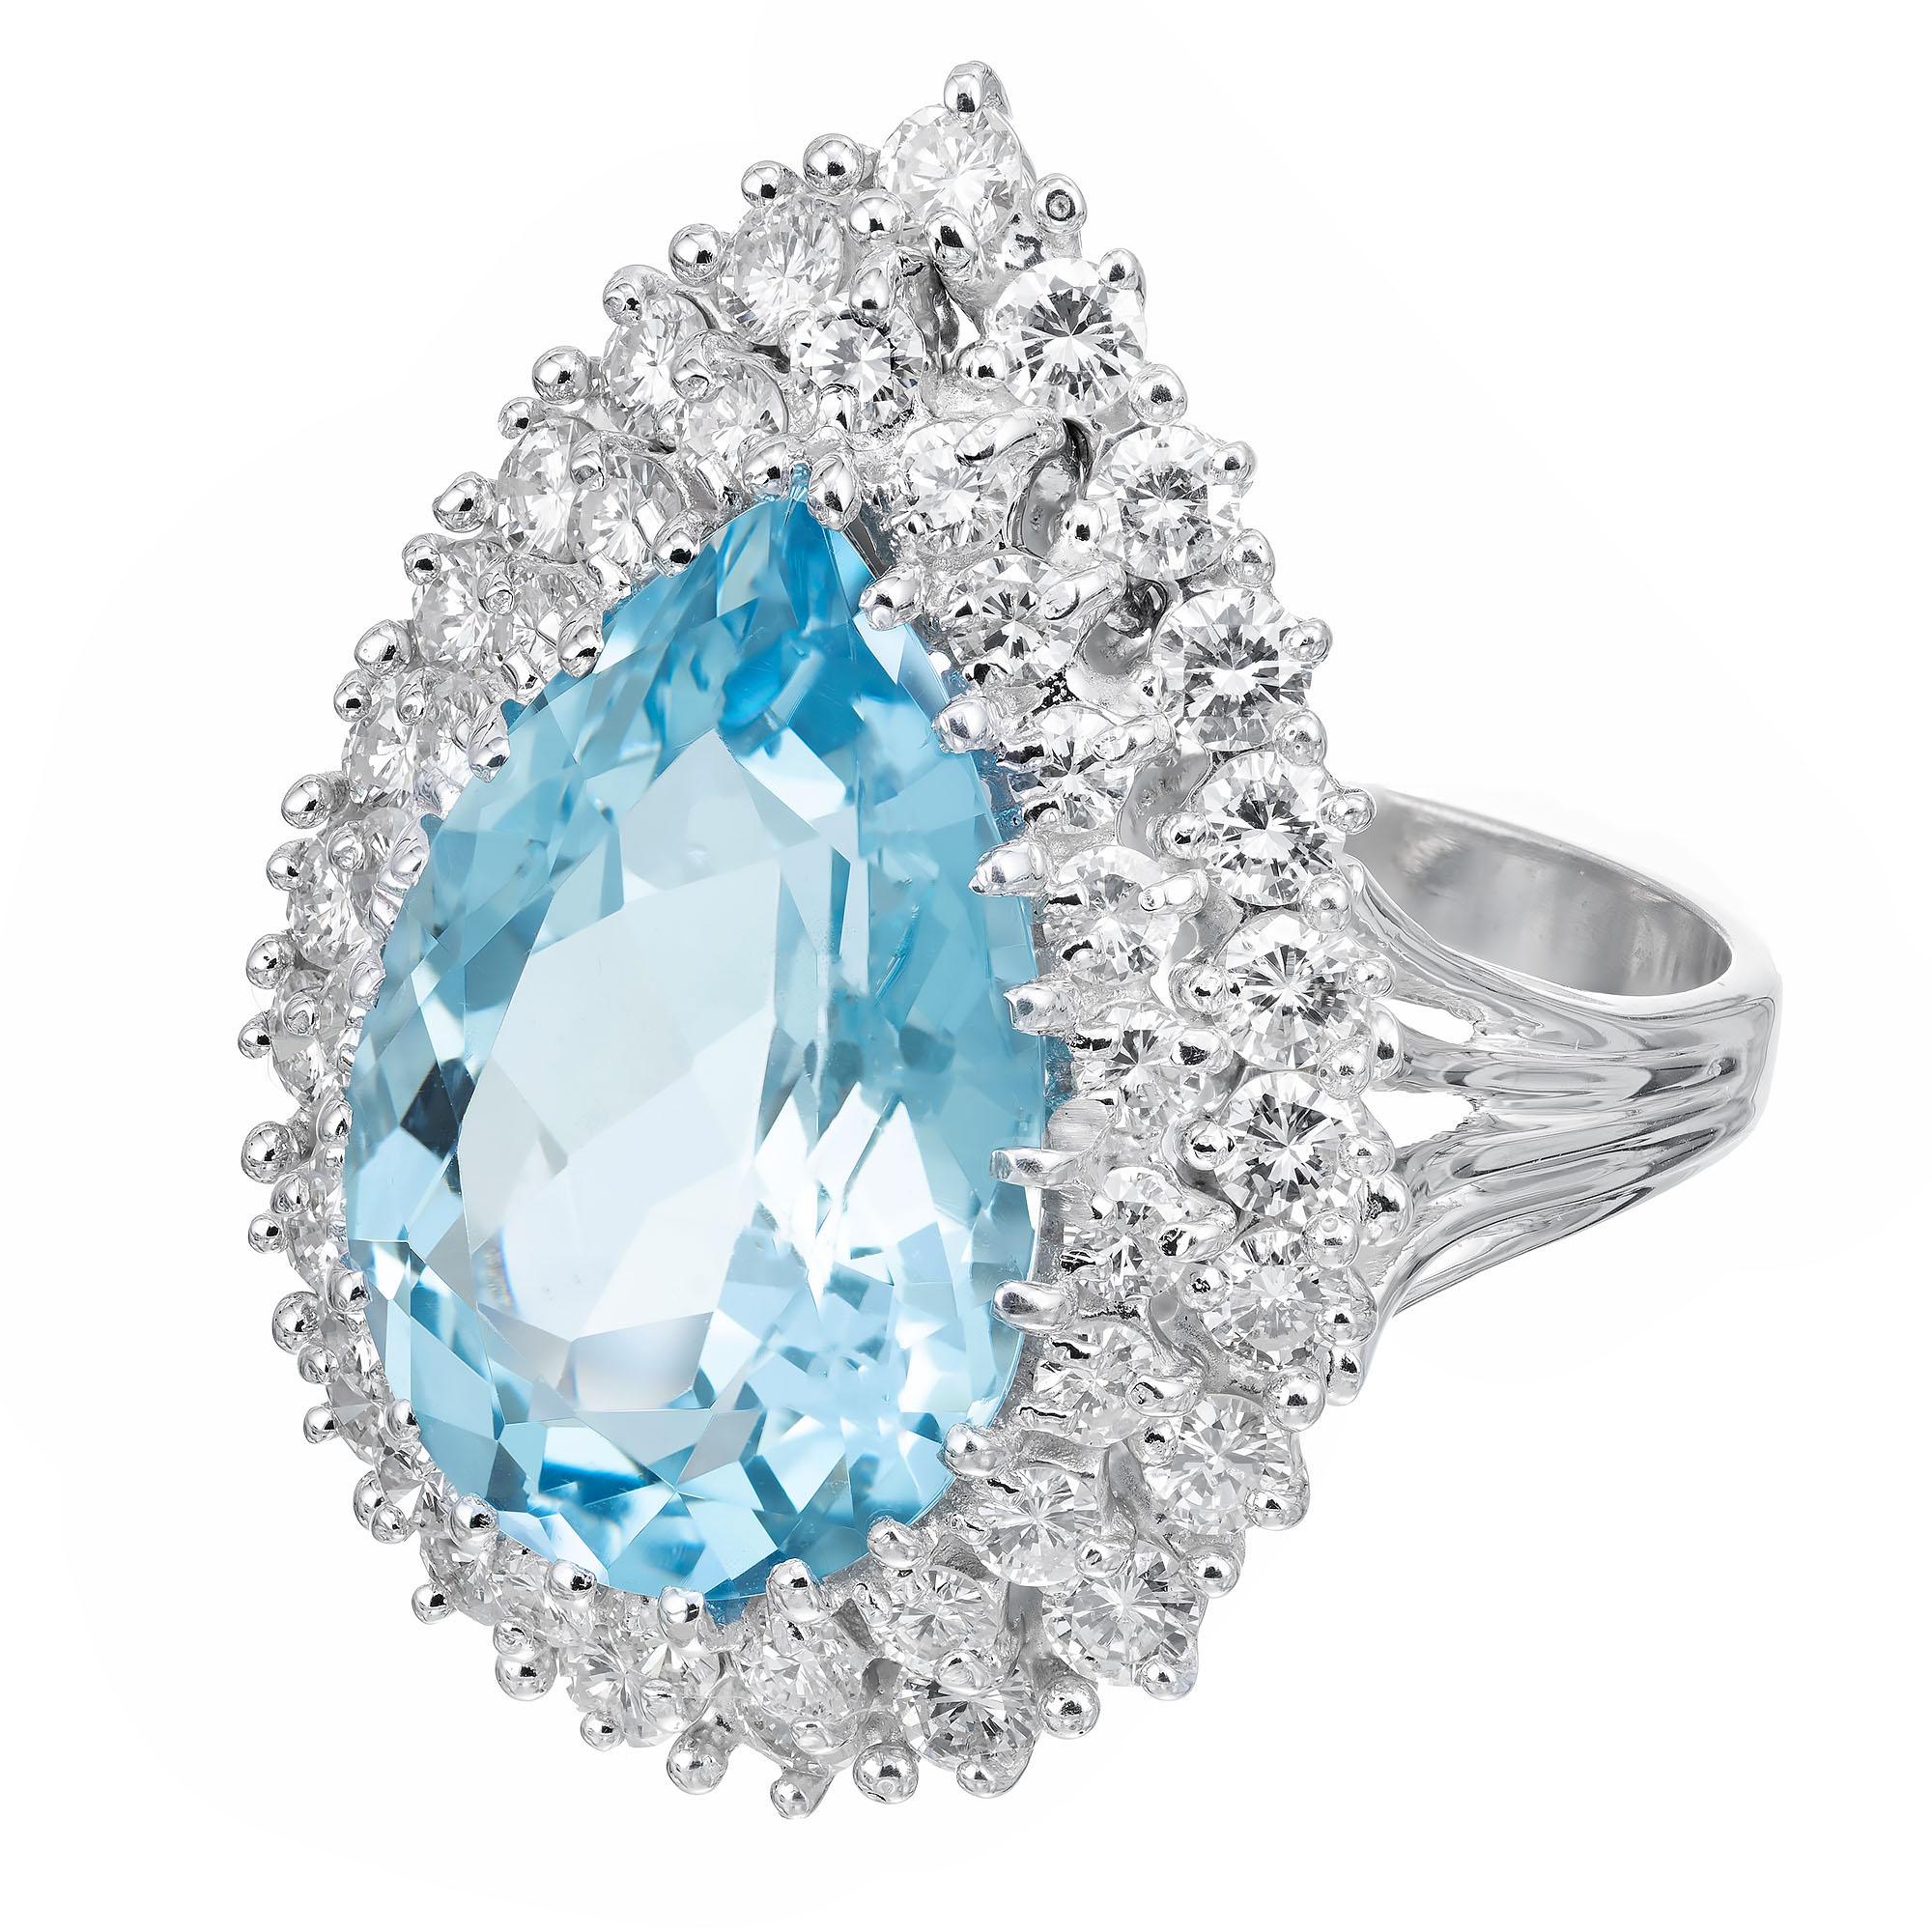 Mid-Century 1960's vintage aqua and diamond ring. 6.75 carat pear shaped bright blue natural aquamarine with a two row halo of bright round cut diamonds in a 14k white gold setting. 

1 pear shaped blue aquamarine, approx. 6.75cts
45 round brilliant